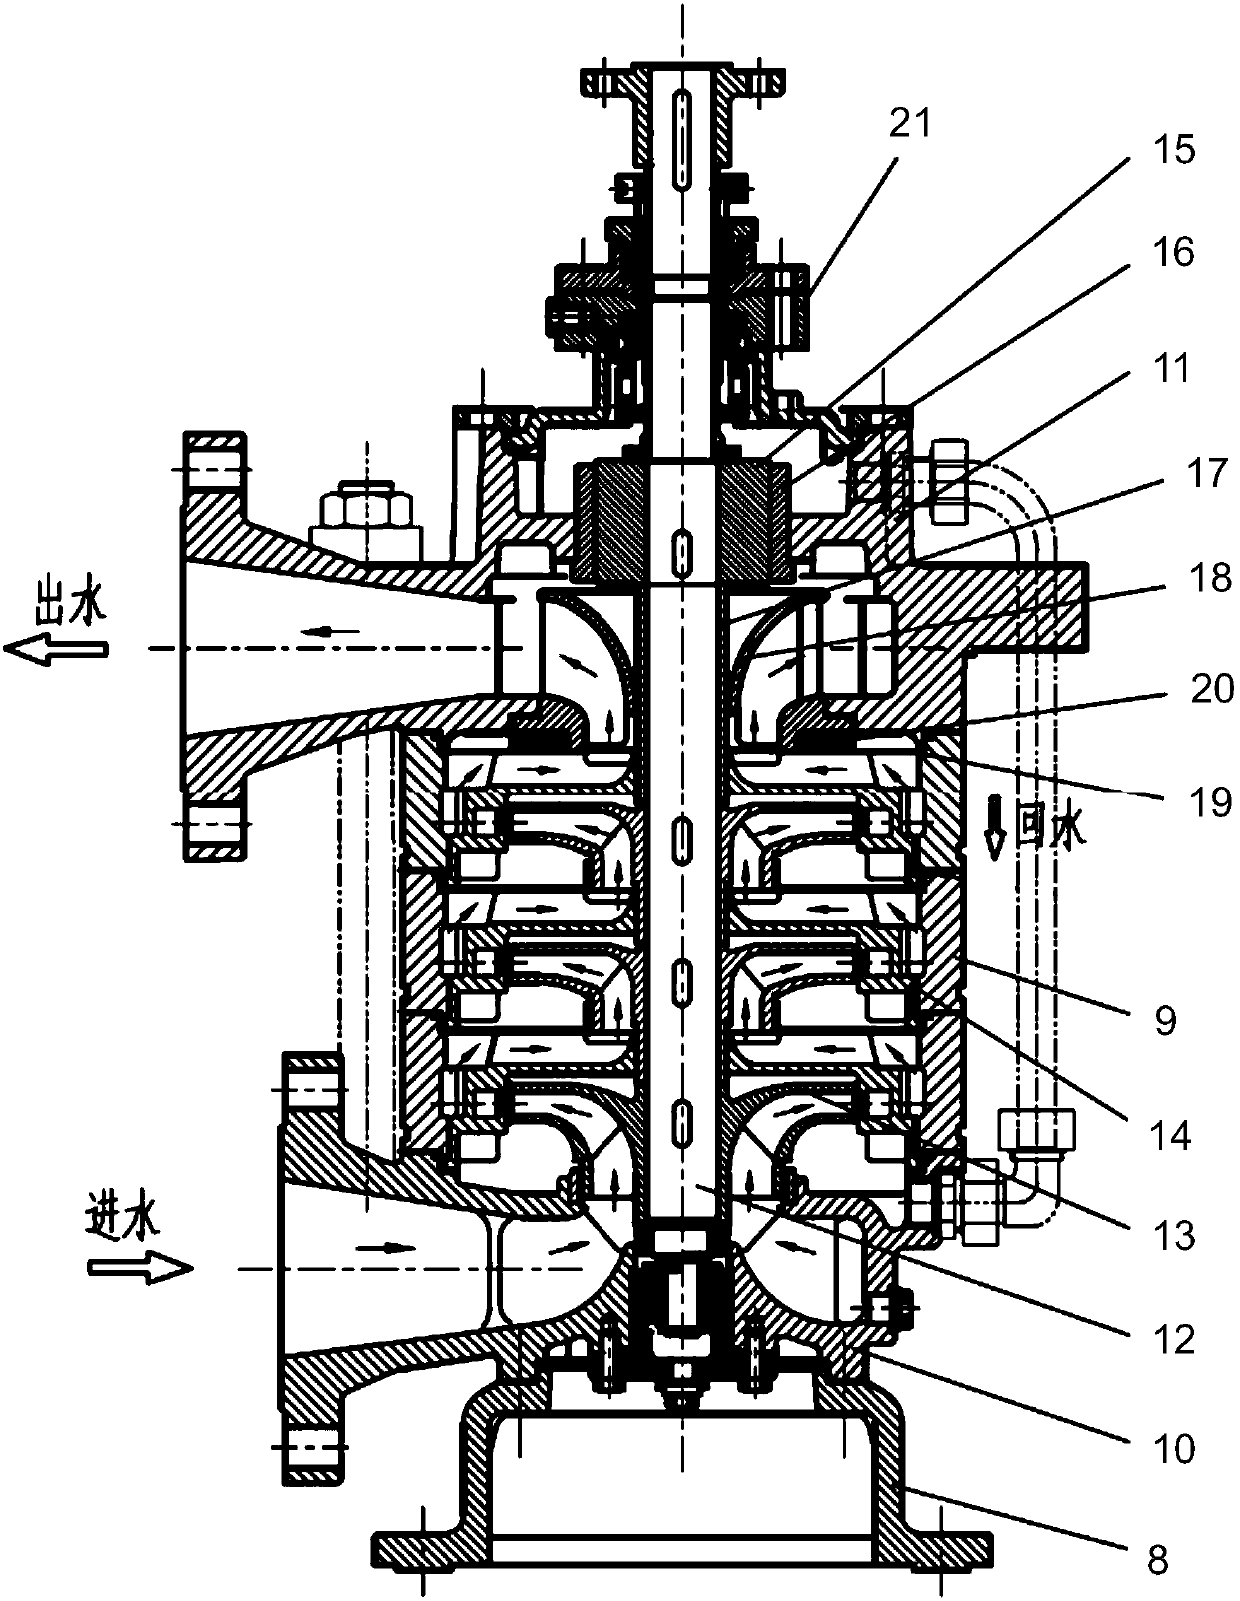 Multi-stage centrifugal pump with low pressure pulsation